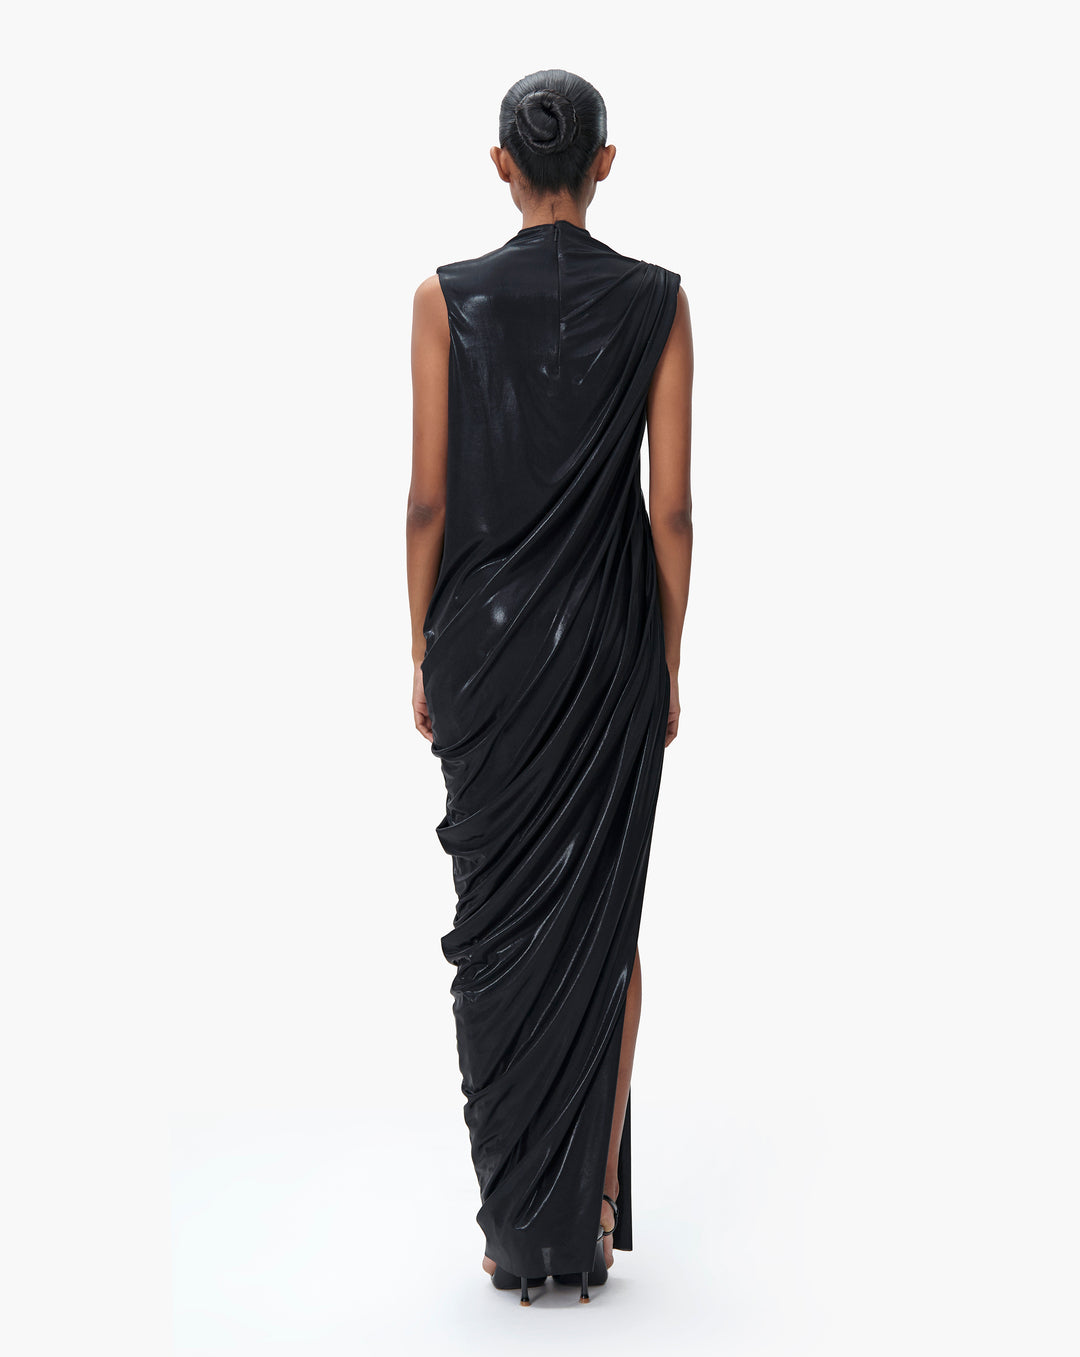 The Meteoric Cowl Draped Gown